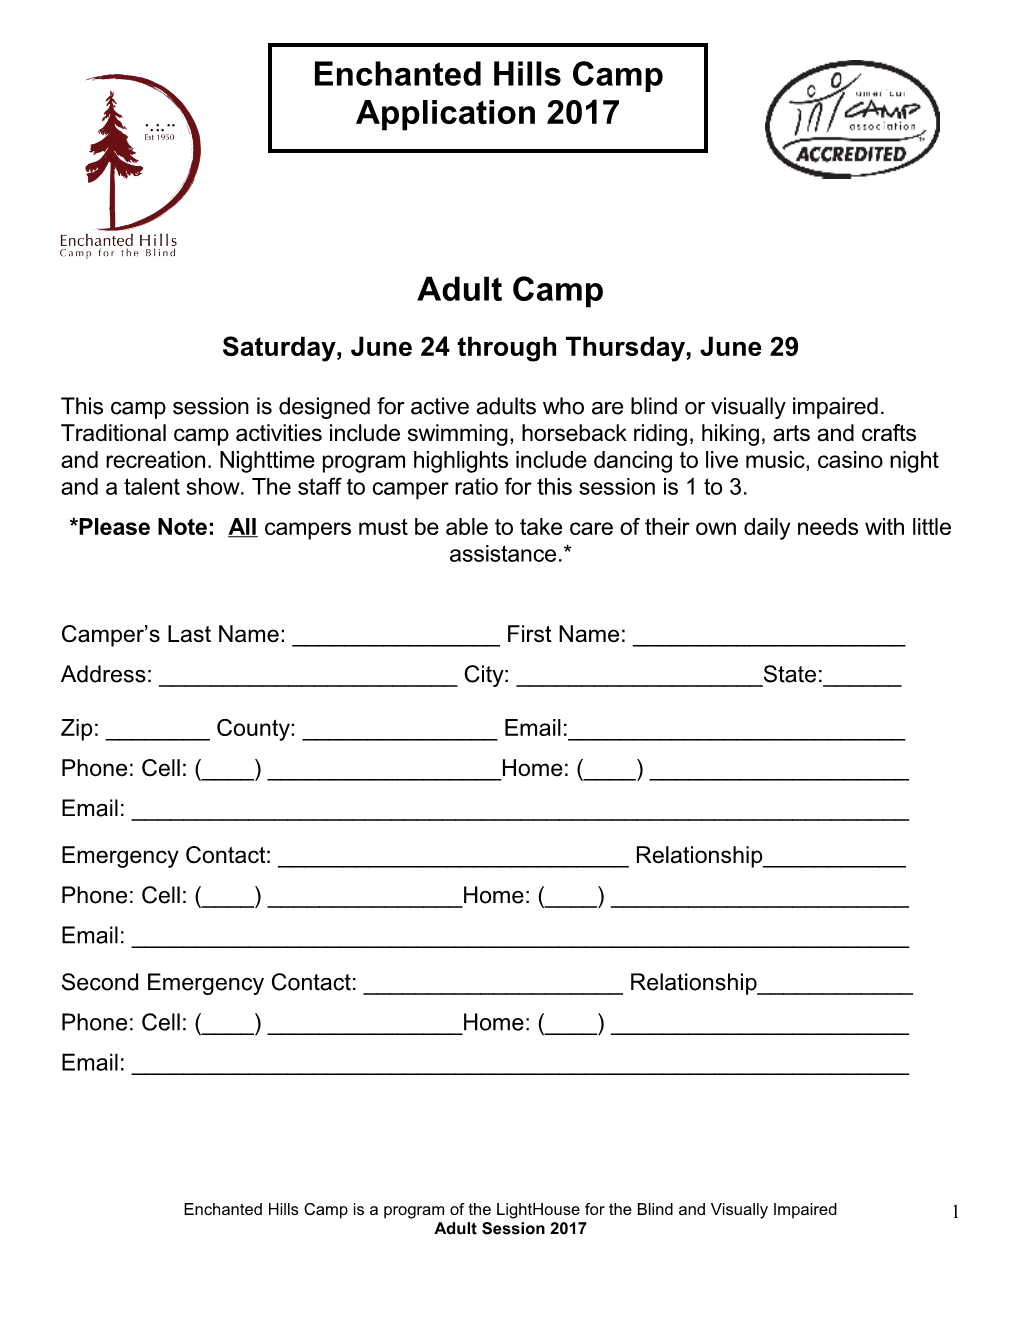 This Camp Session Is Designed for Active Adults Who Are Blind Or Visually Impaired. Traditional